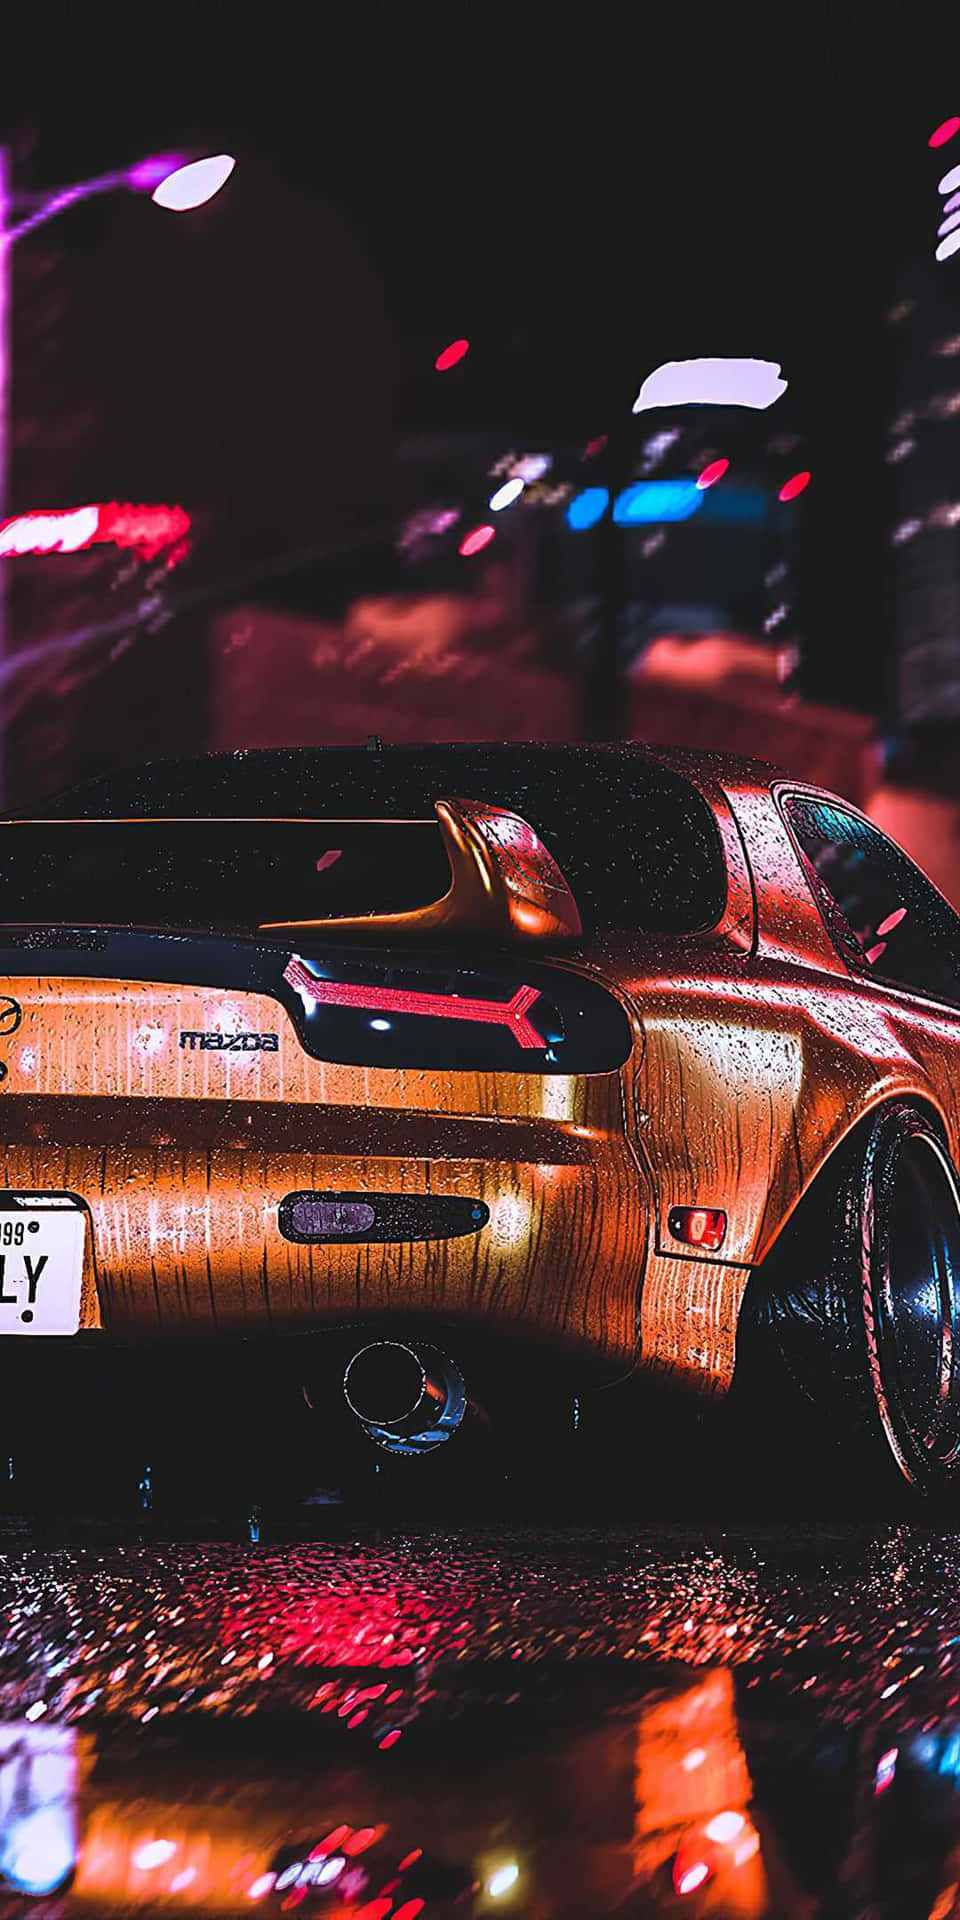 Zoom past the competition in the luxurious JDM Supra Wallpaper